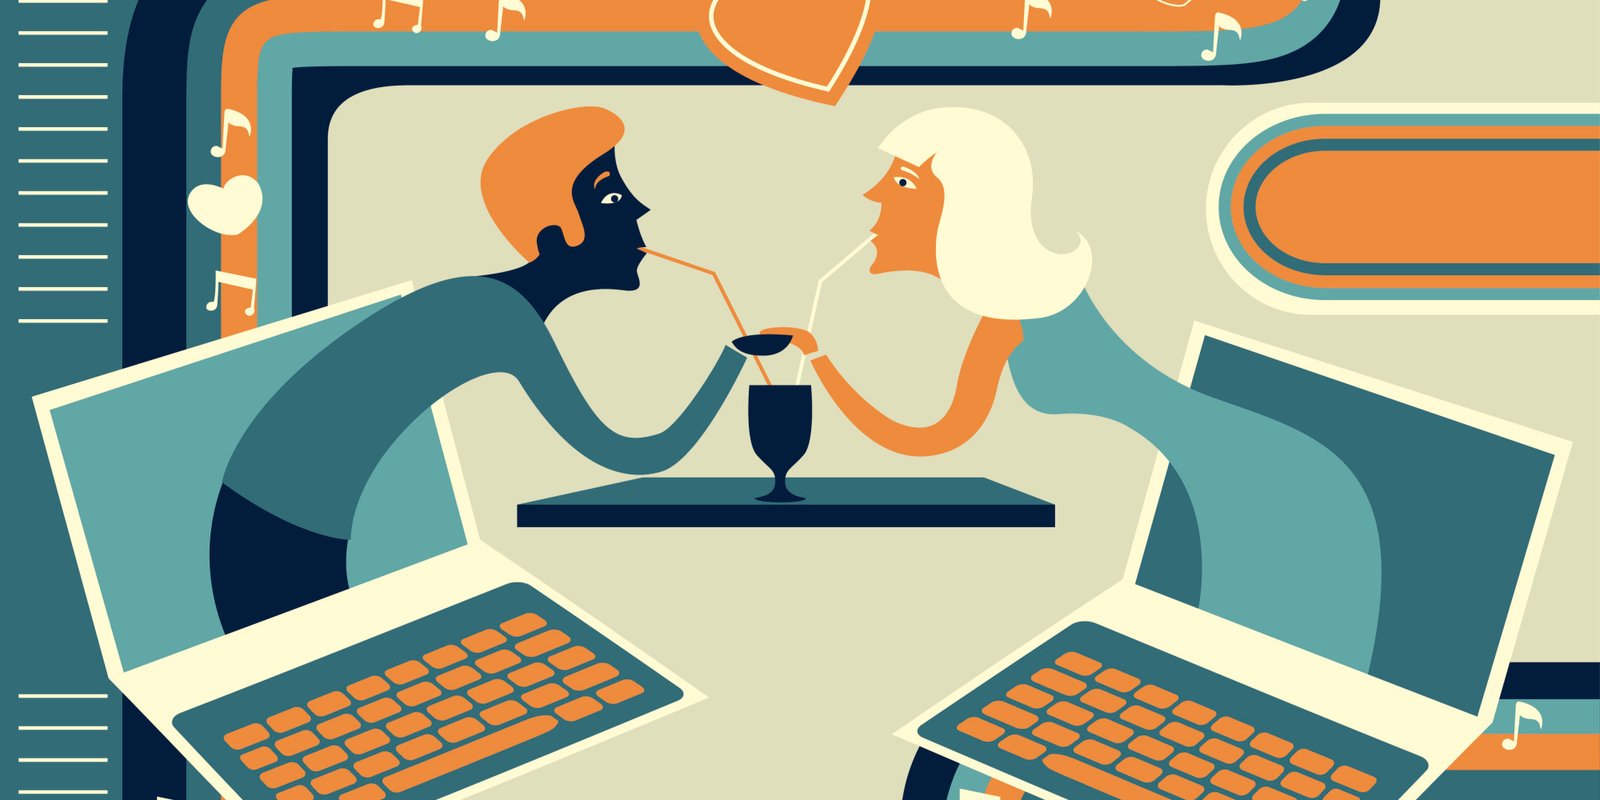 Illustrative of couple representing online dating